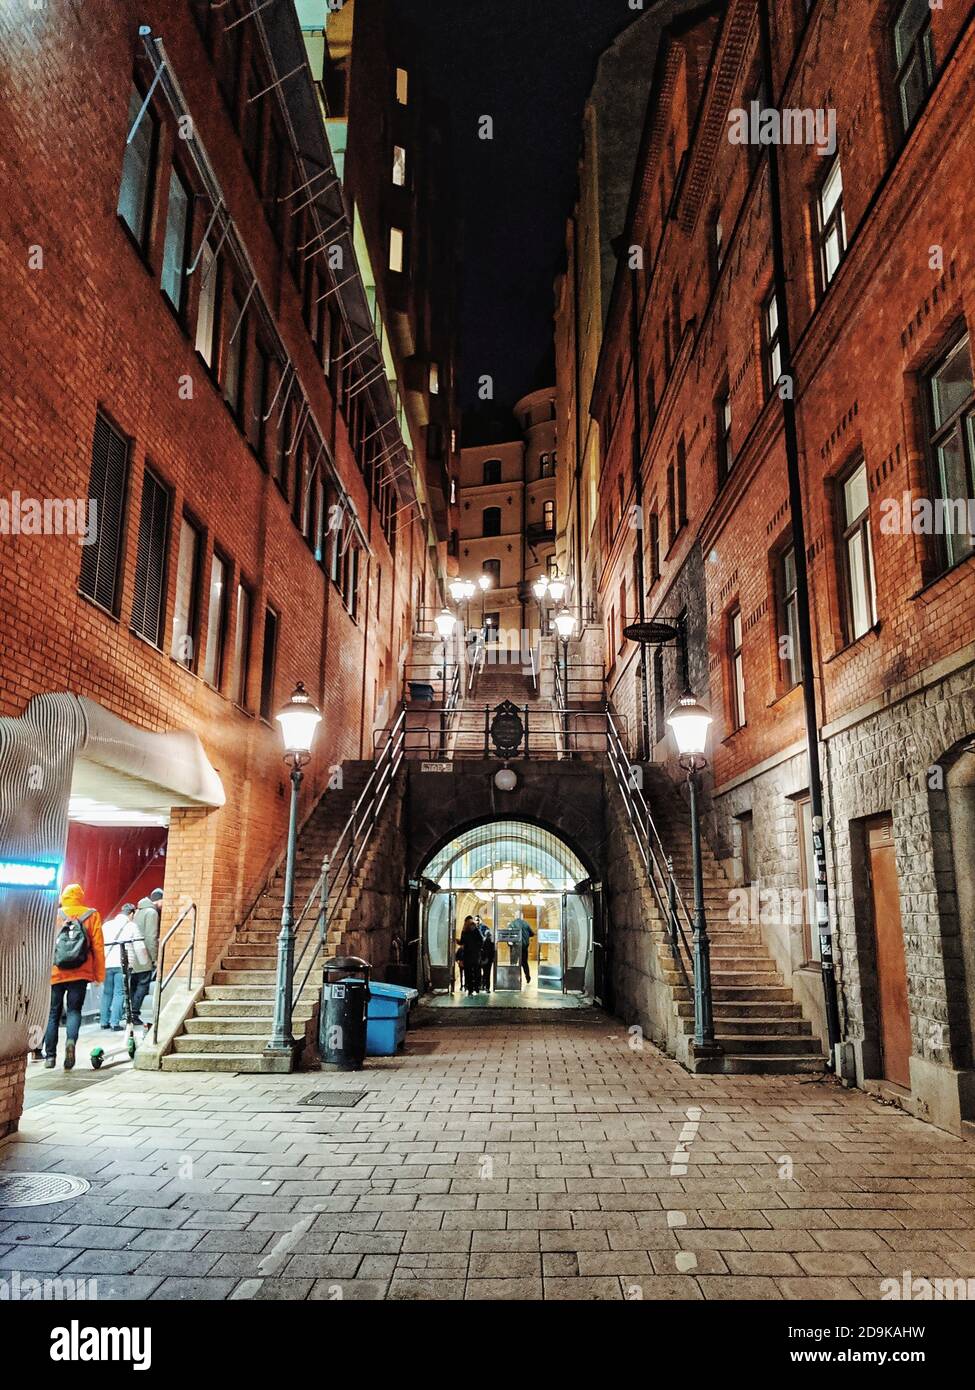 Staircase illuminated by lampposts in Tunnelgatan, Stockholm, Sweden Stock Photo